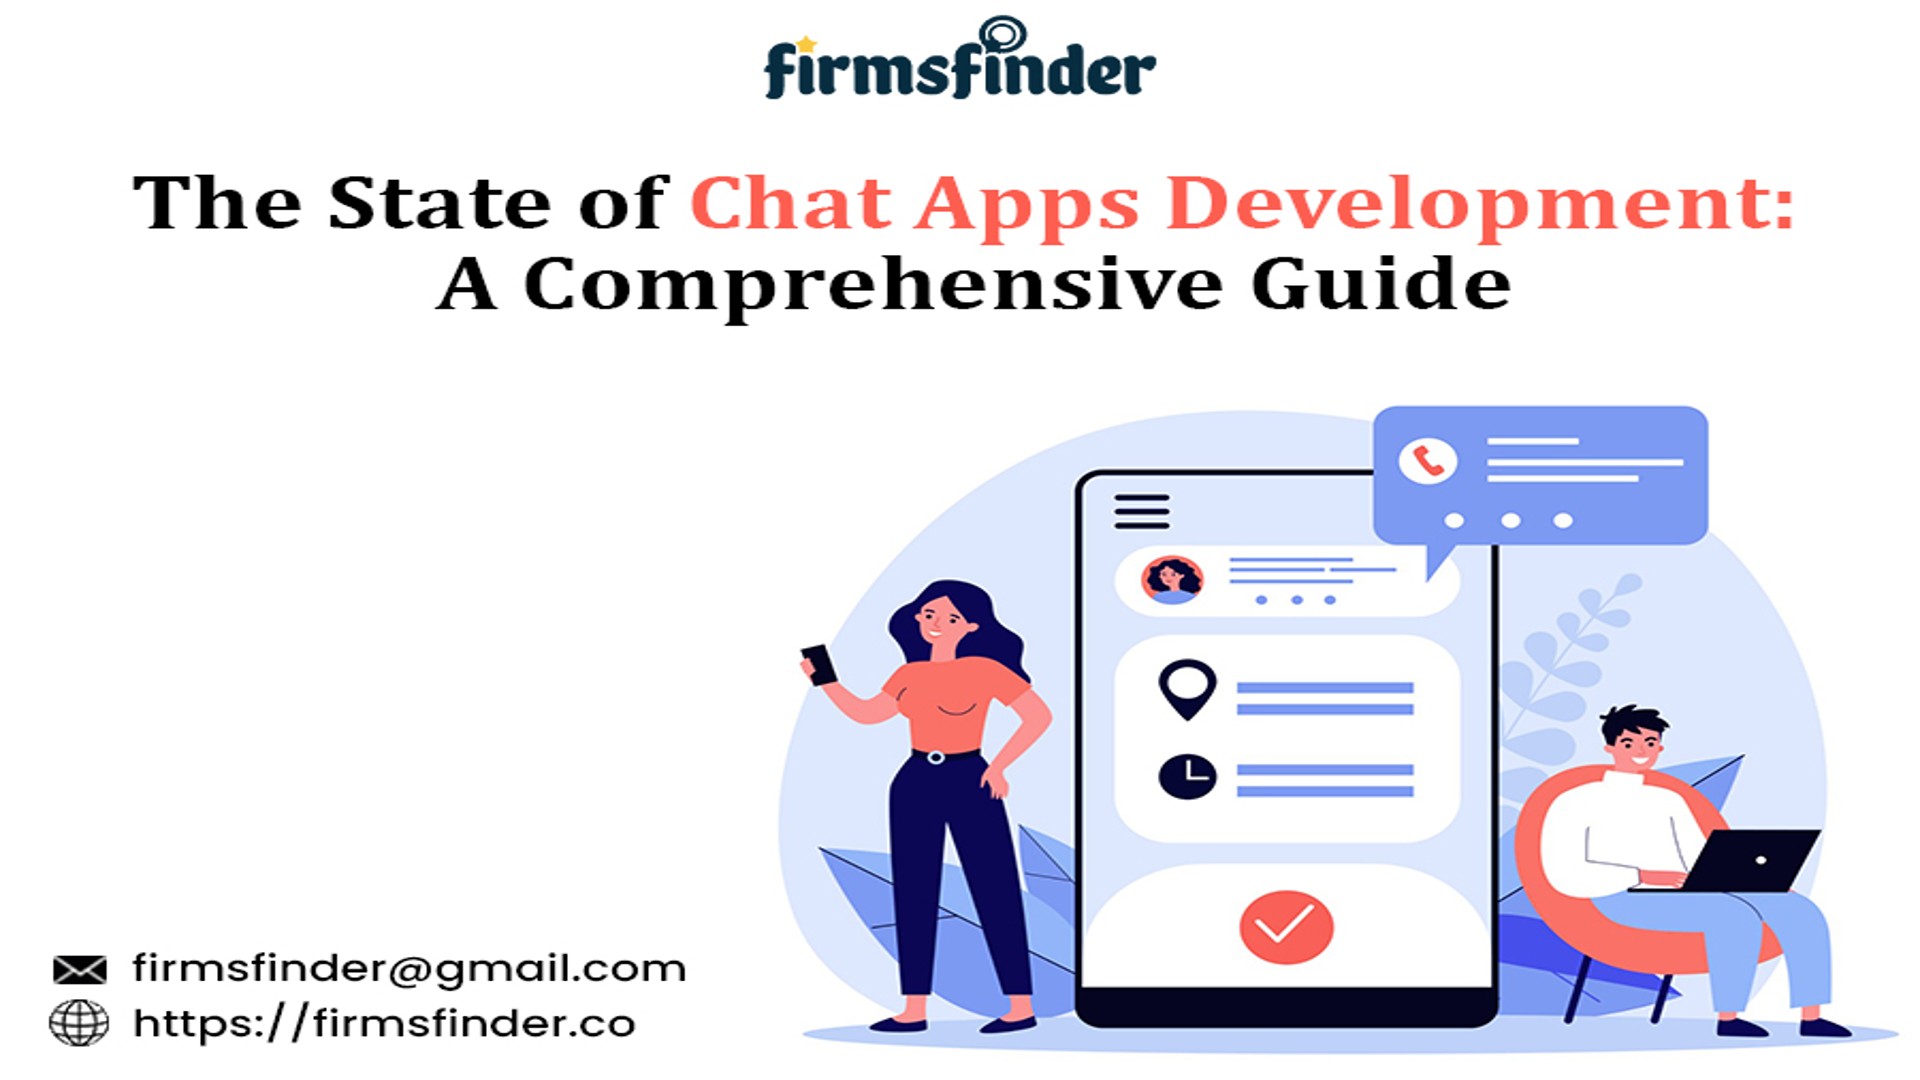 The State of Chat Apps Development: A Comprehensive Guide